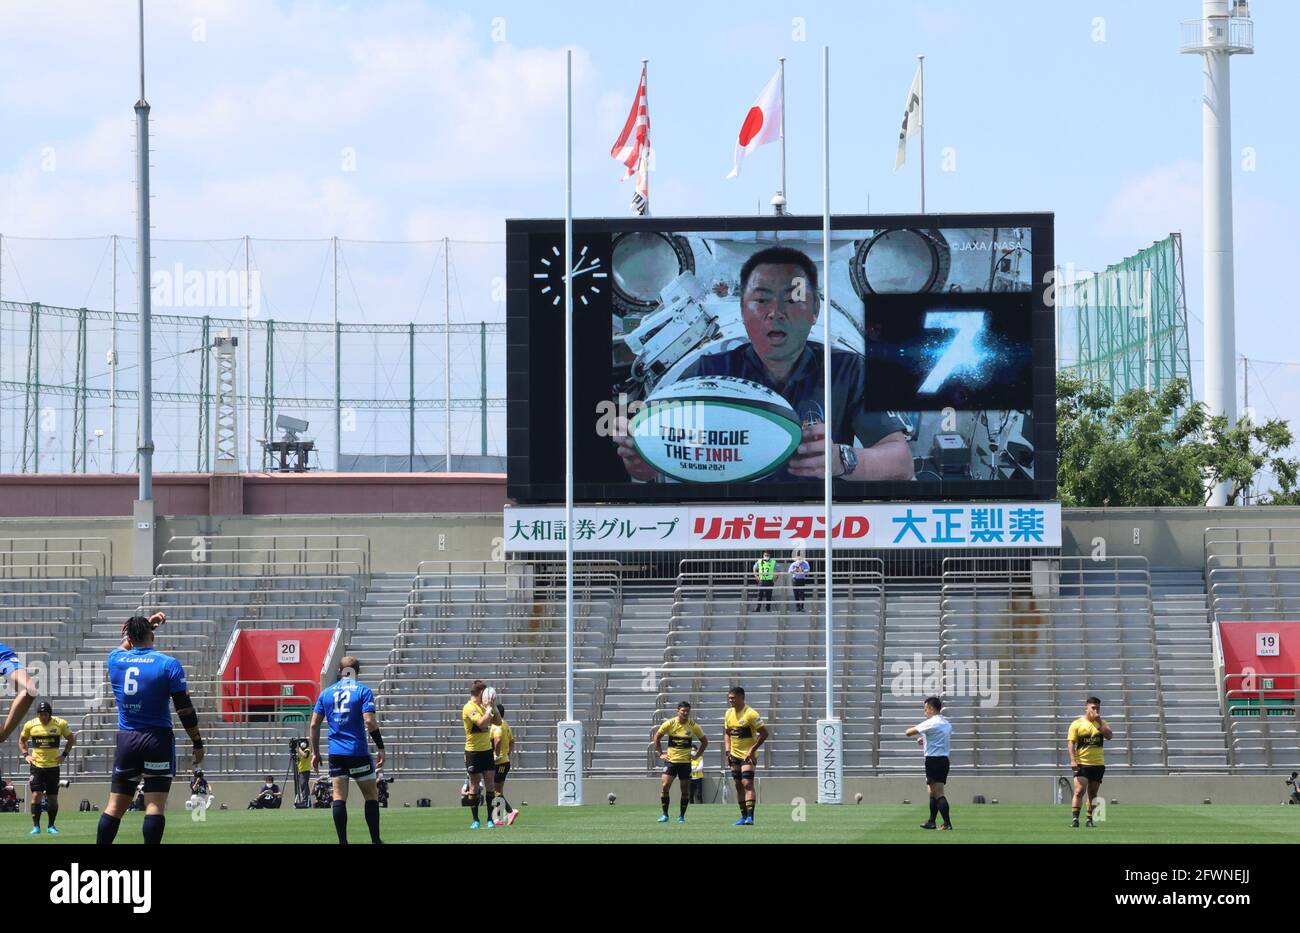 Tokyo, Japan. 23rd May, 2021. Japanese astronaut Akihiko Hoshide counts down for the kick off of the Japan Rugby Top League 2021 from the Internal Space Station (ISS) on a large screen at the Prince Chichibu rugby stadium in Tokyo on Sunday, May 23, 2021. Panasonic Wild Knights defeated Suntory Sungoliath 31-26 in the final. Credit: Yoshio Tsunoda/AFLO/Alamy Live News Stock Photo